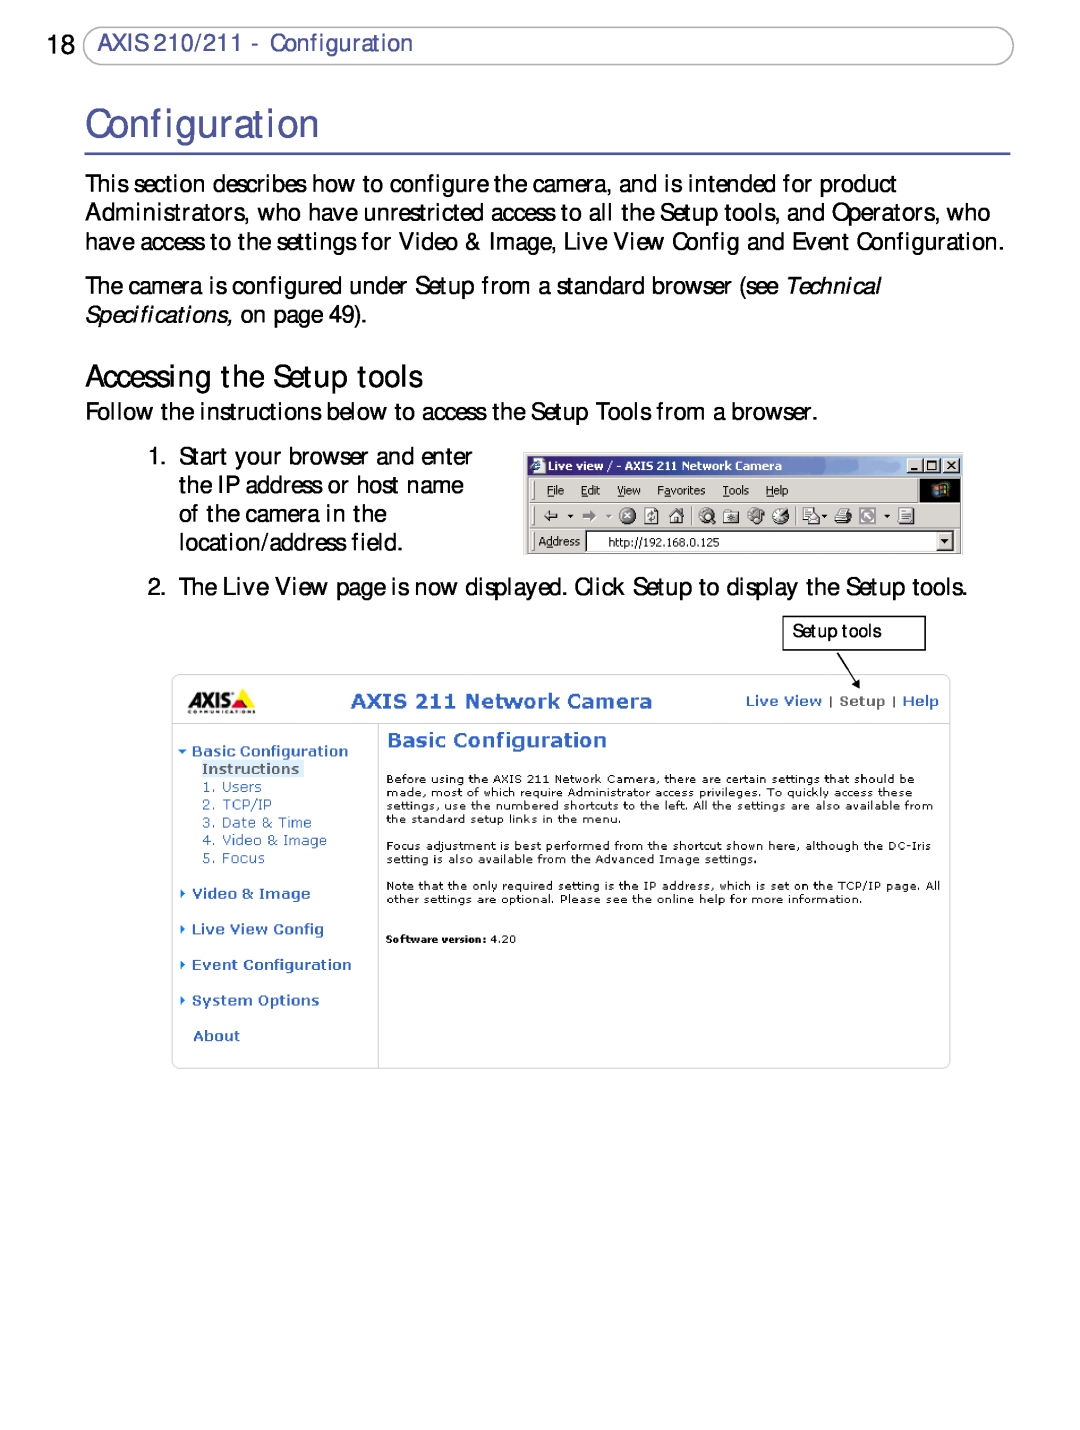 Axis Communications user manual Accessing the Setup tools, AXIS 210/211 - Configuration 